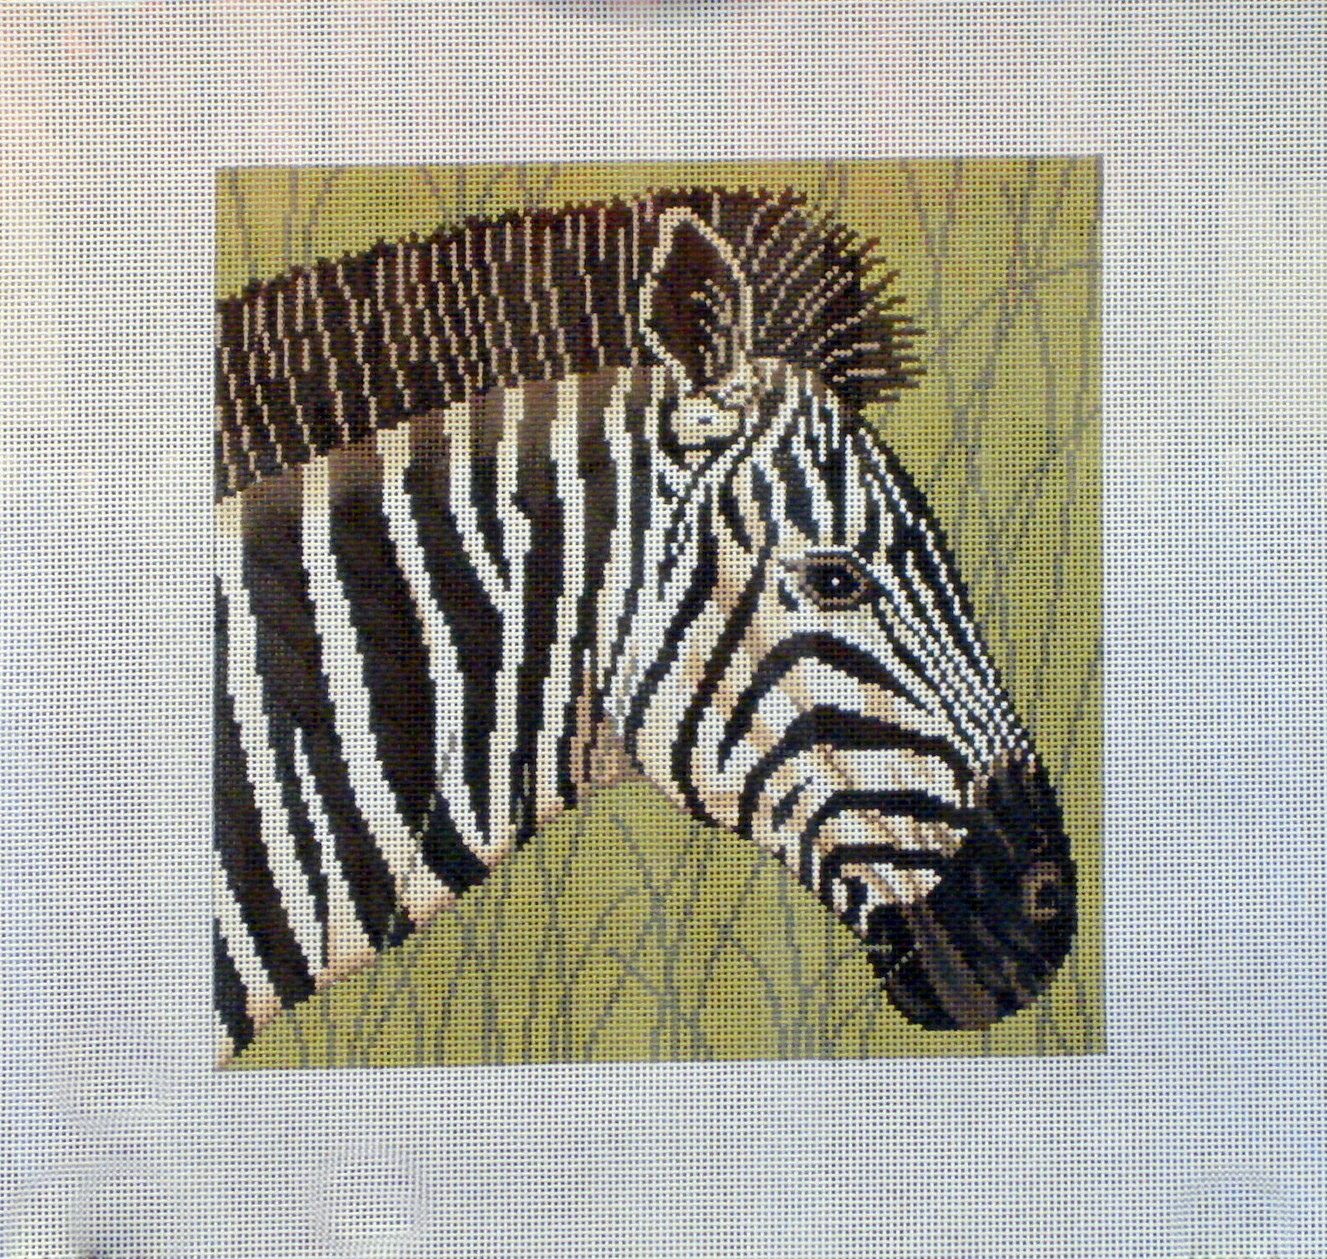 Zebra in Grass       (Handpainted by JP Designs)*Product may take longer than usual to arrive*